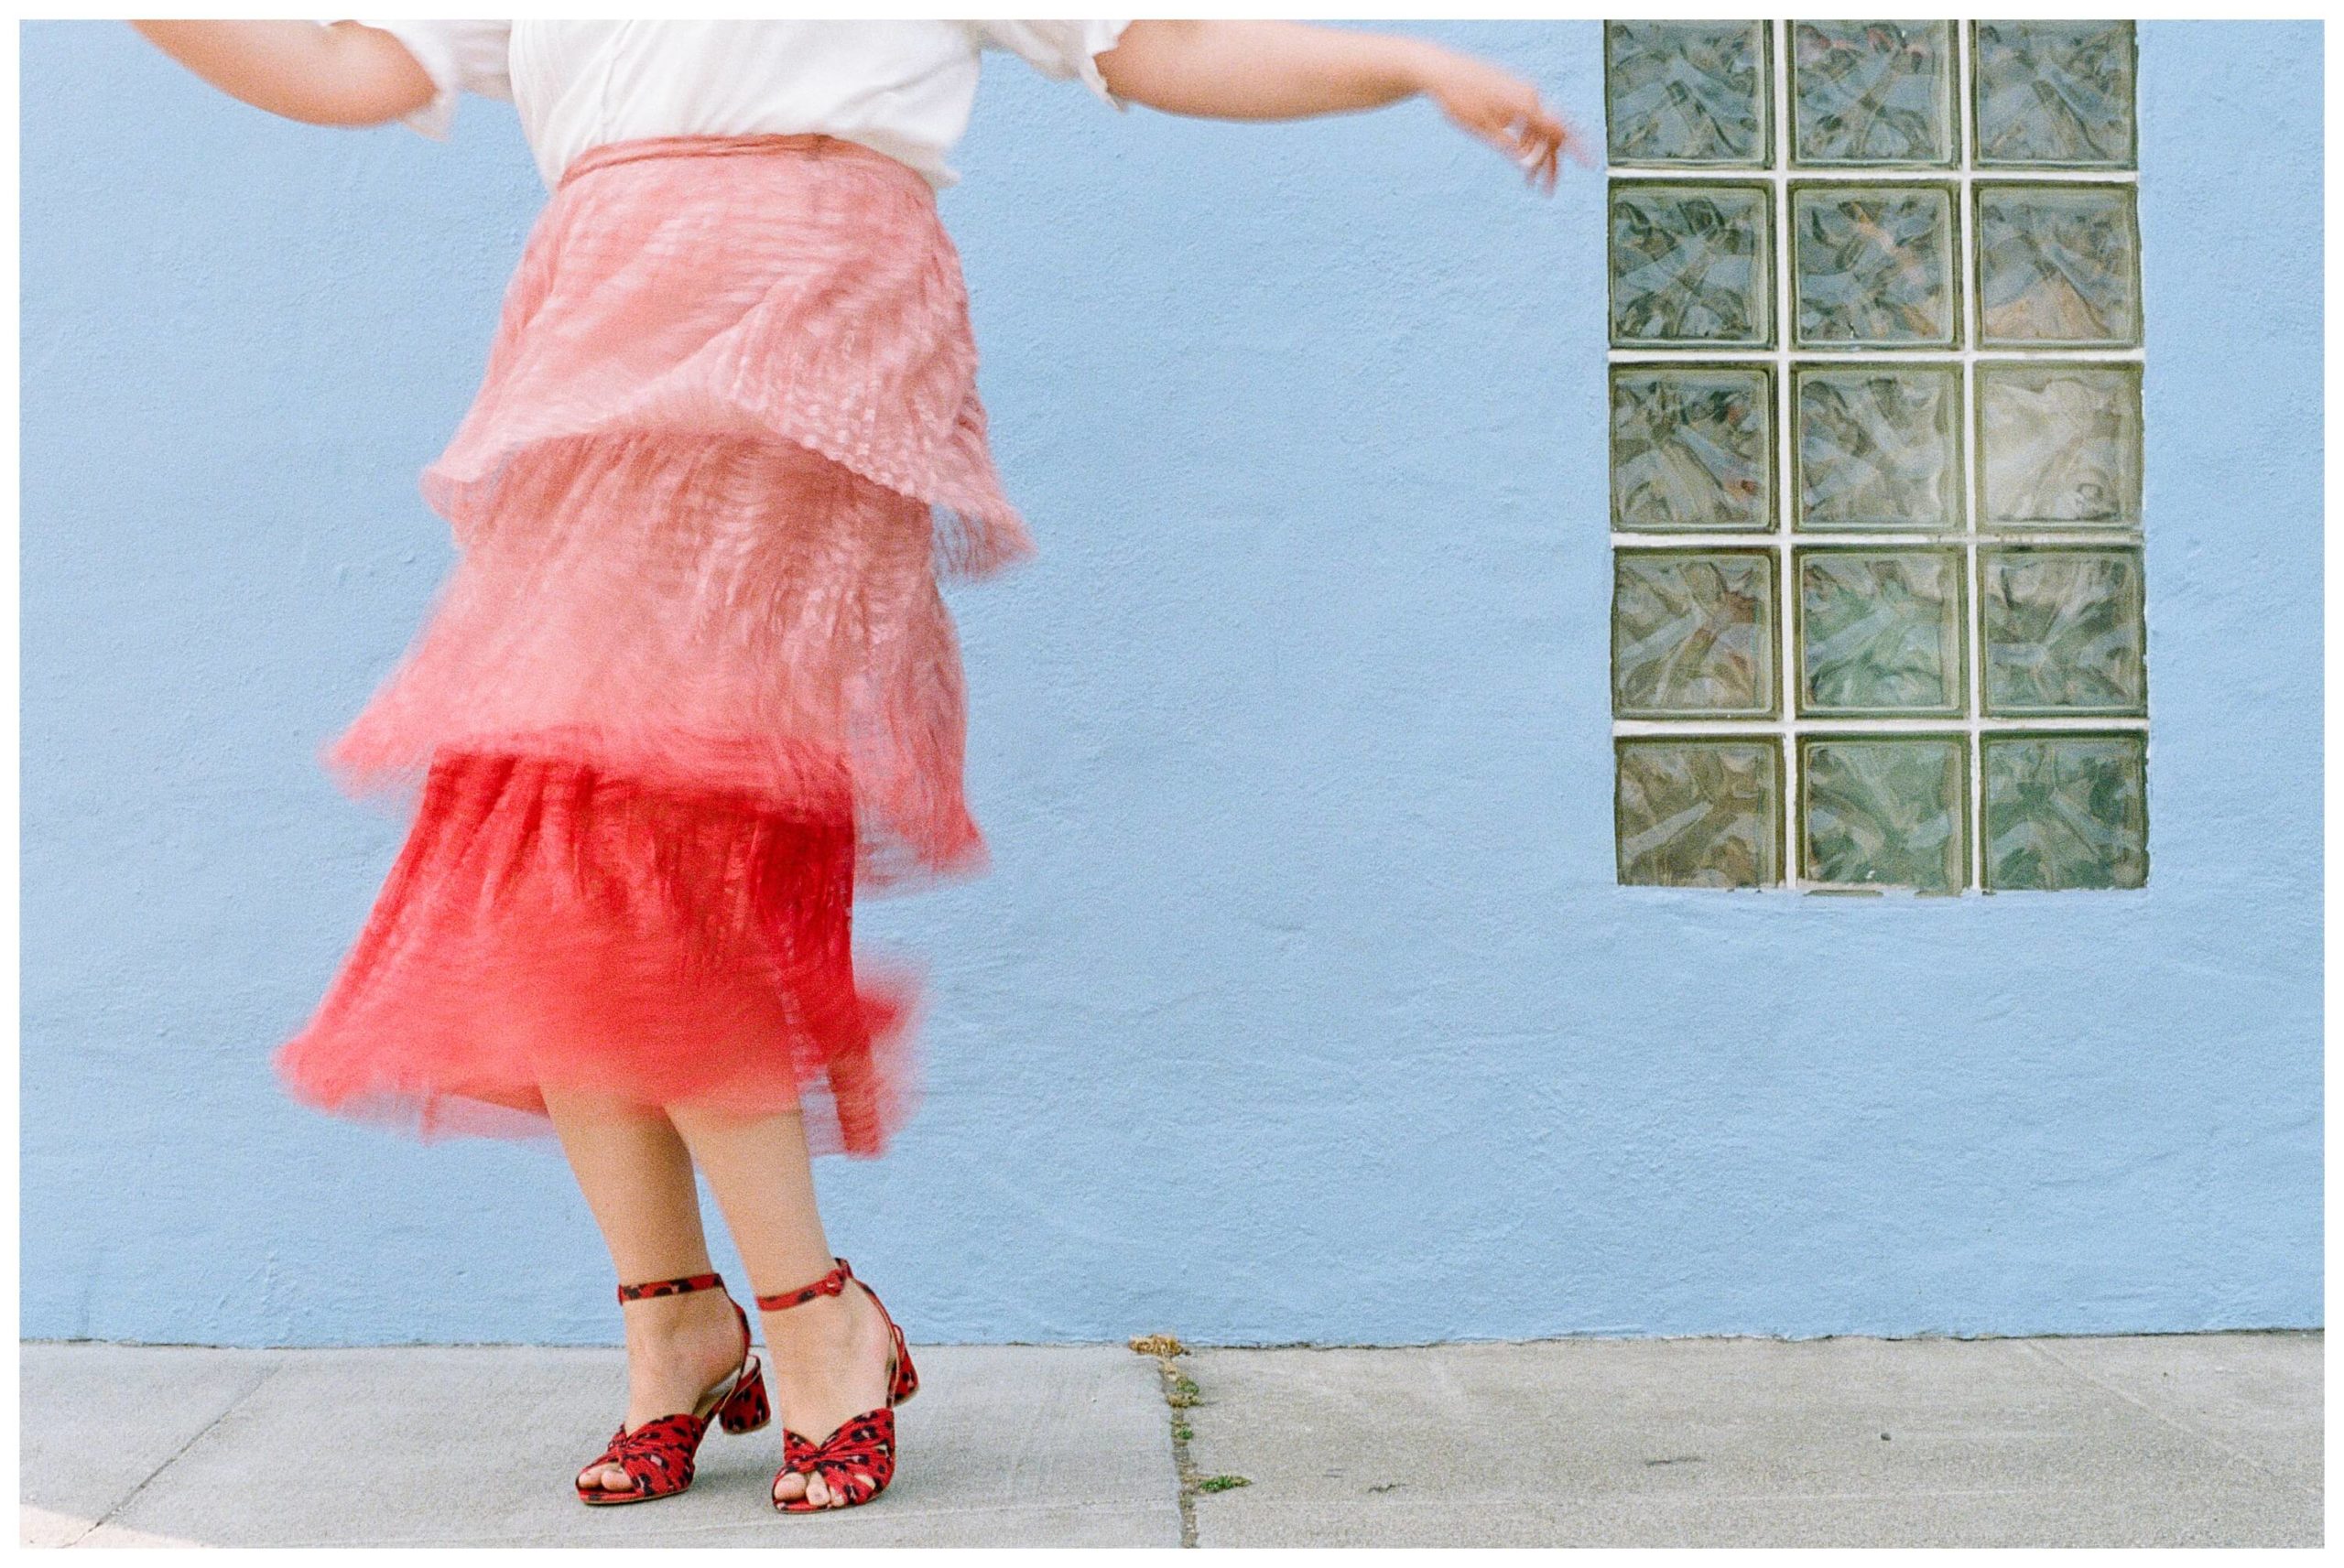 A girl wearing a white shirt and ombré red skirt with red heels twists and turns in front of a blue wall. You can see the movement of her skirt as she dances.